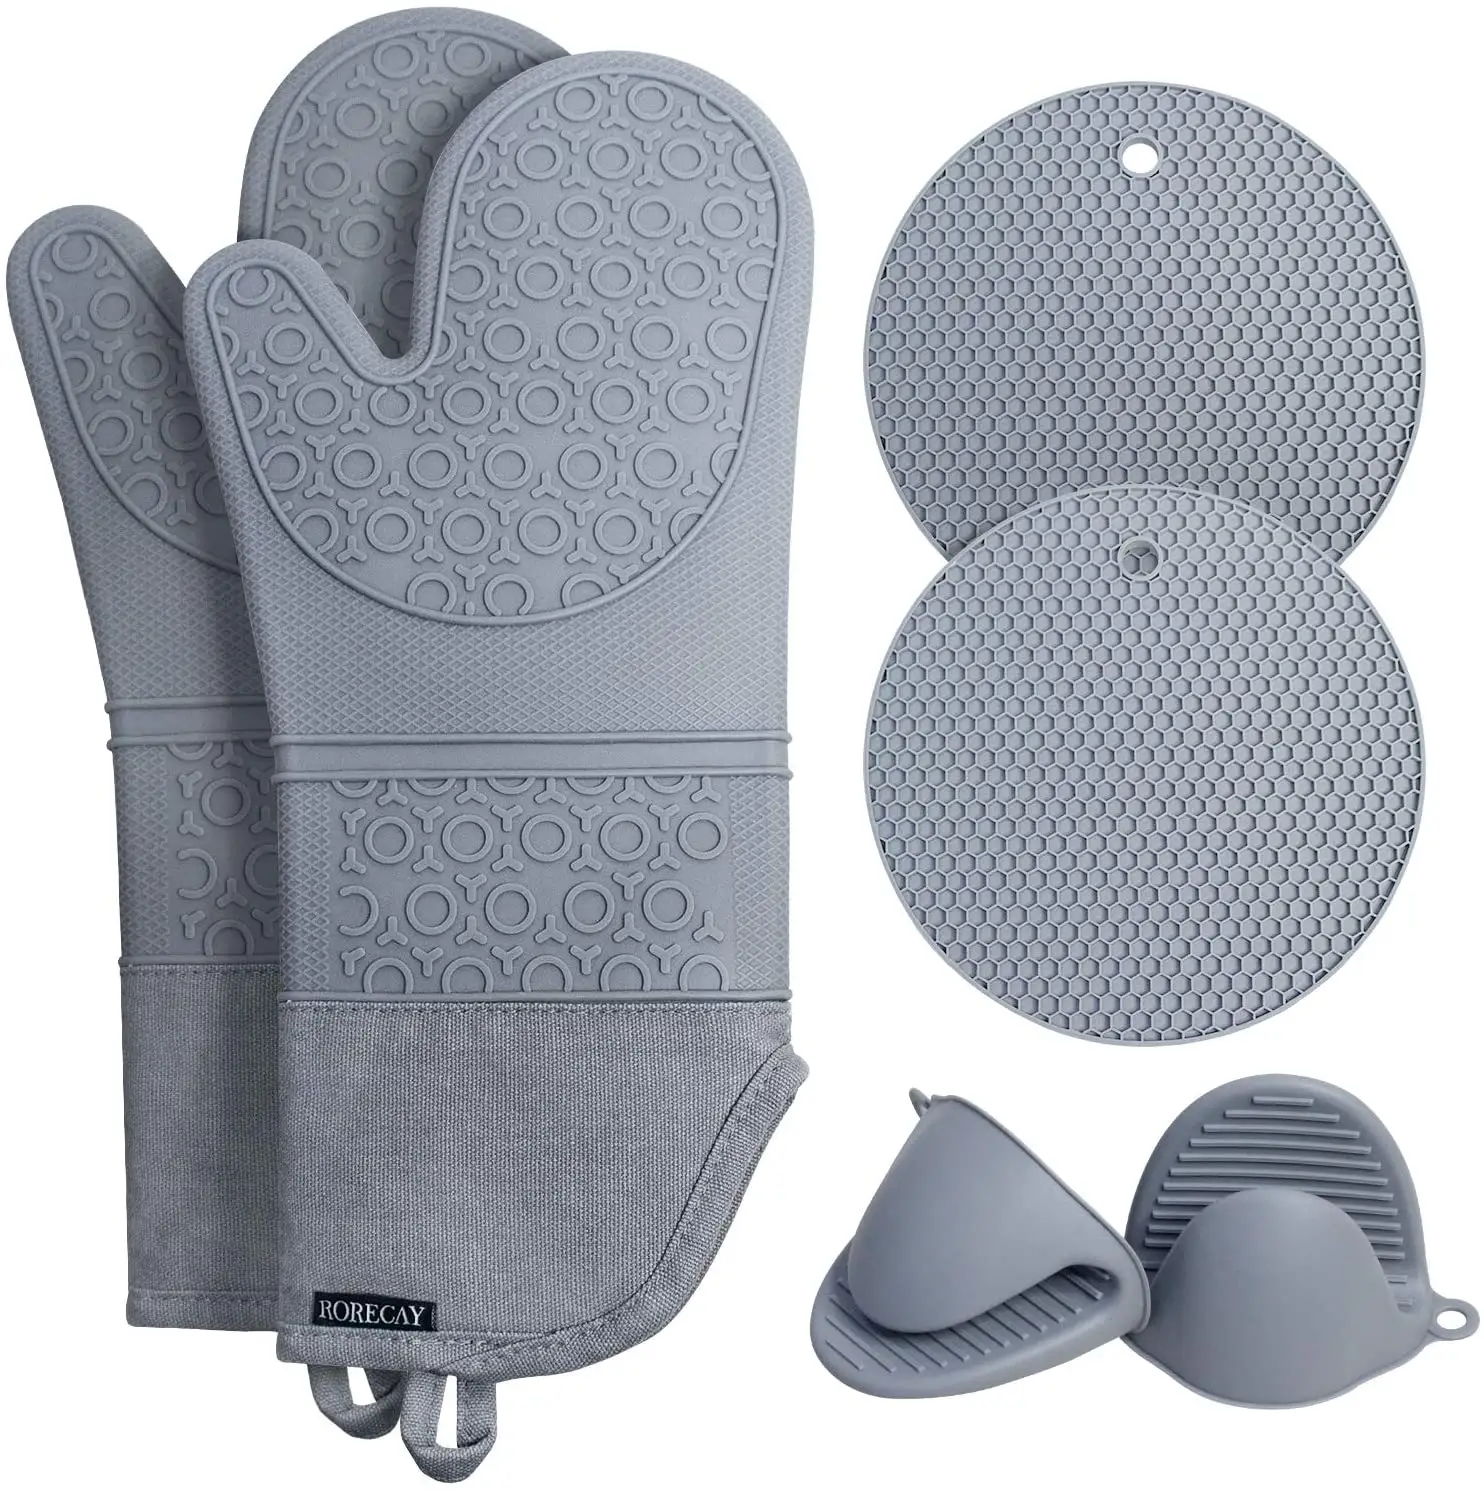 Kingwise Kitchen Heat Resistant BBQ Grill Baking Oven Mitts Microwave Safe Silicone Oven Gloves with Clips Mats